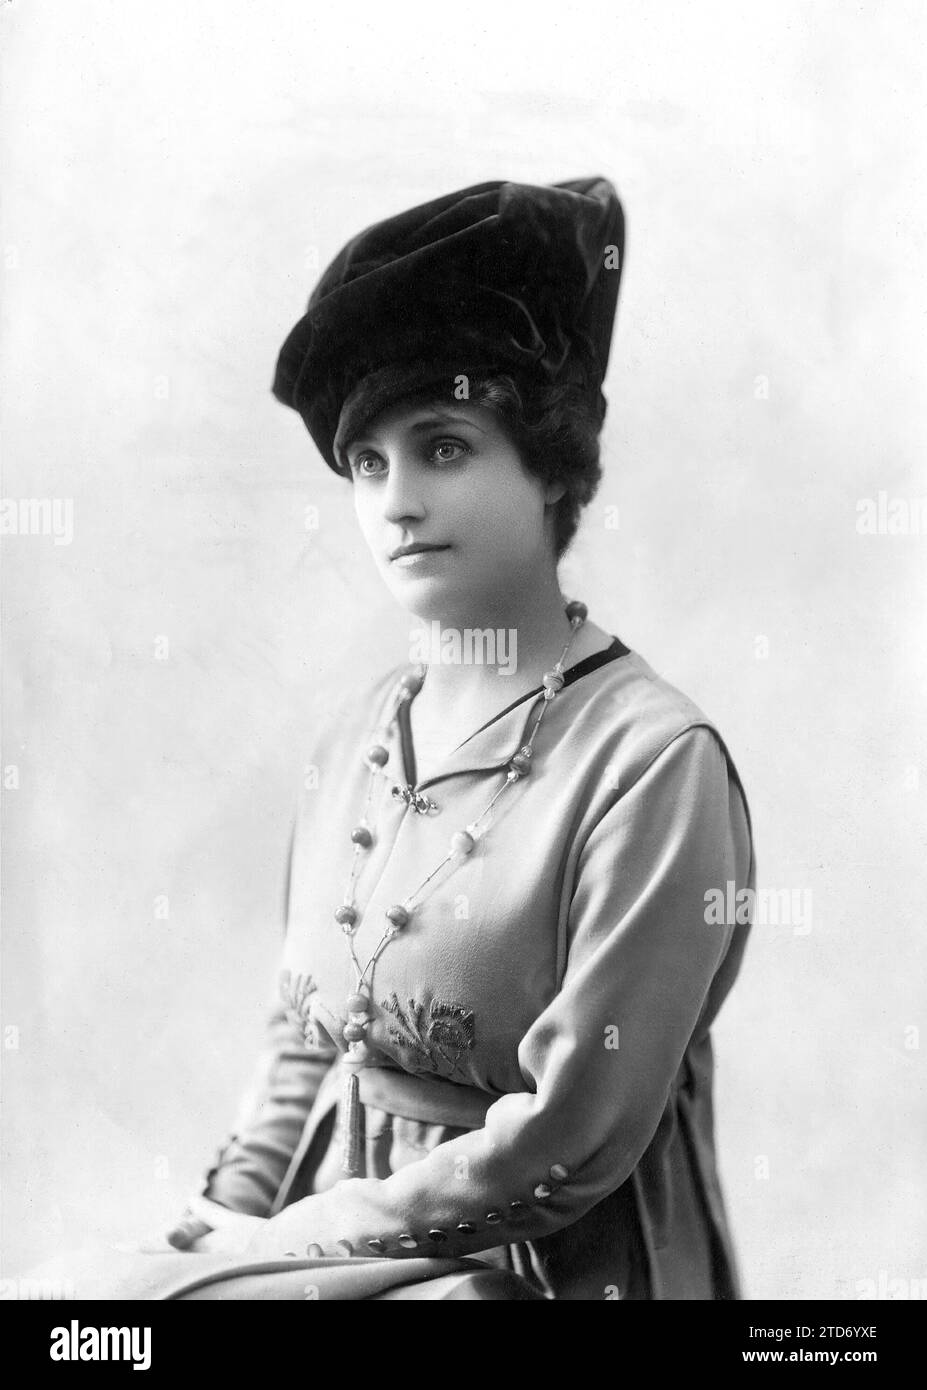 09/30/1917. Mme. Del Raynal with a very simple brown velvet cap. Credit: Album / Archivo ABC / Henri Manuel Stock Photo